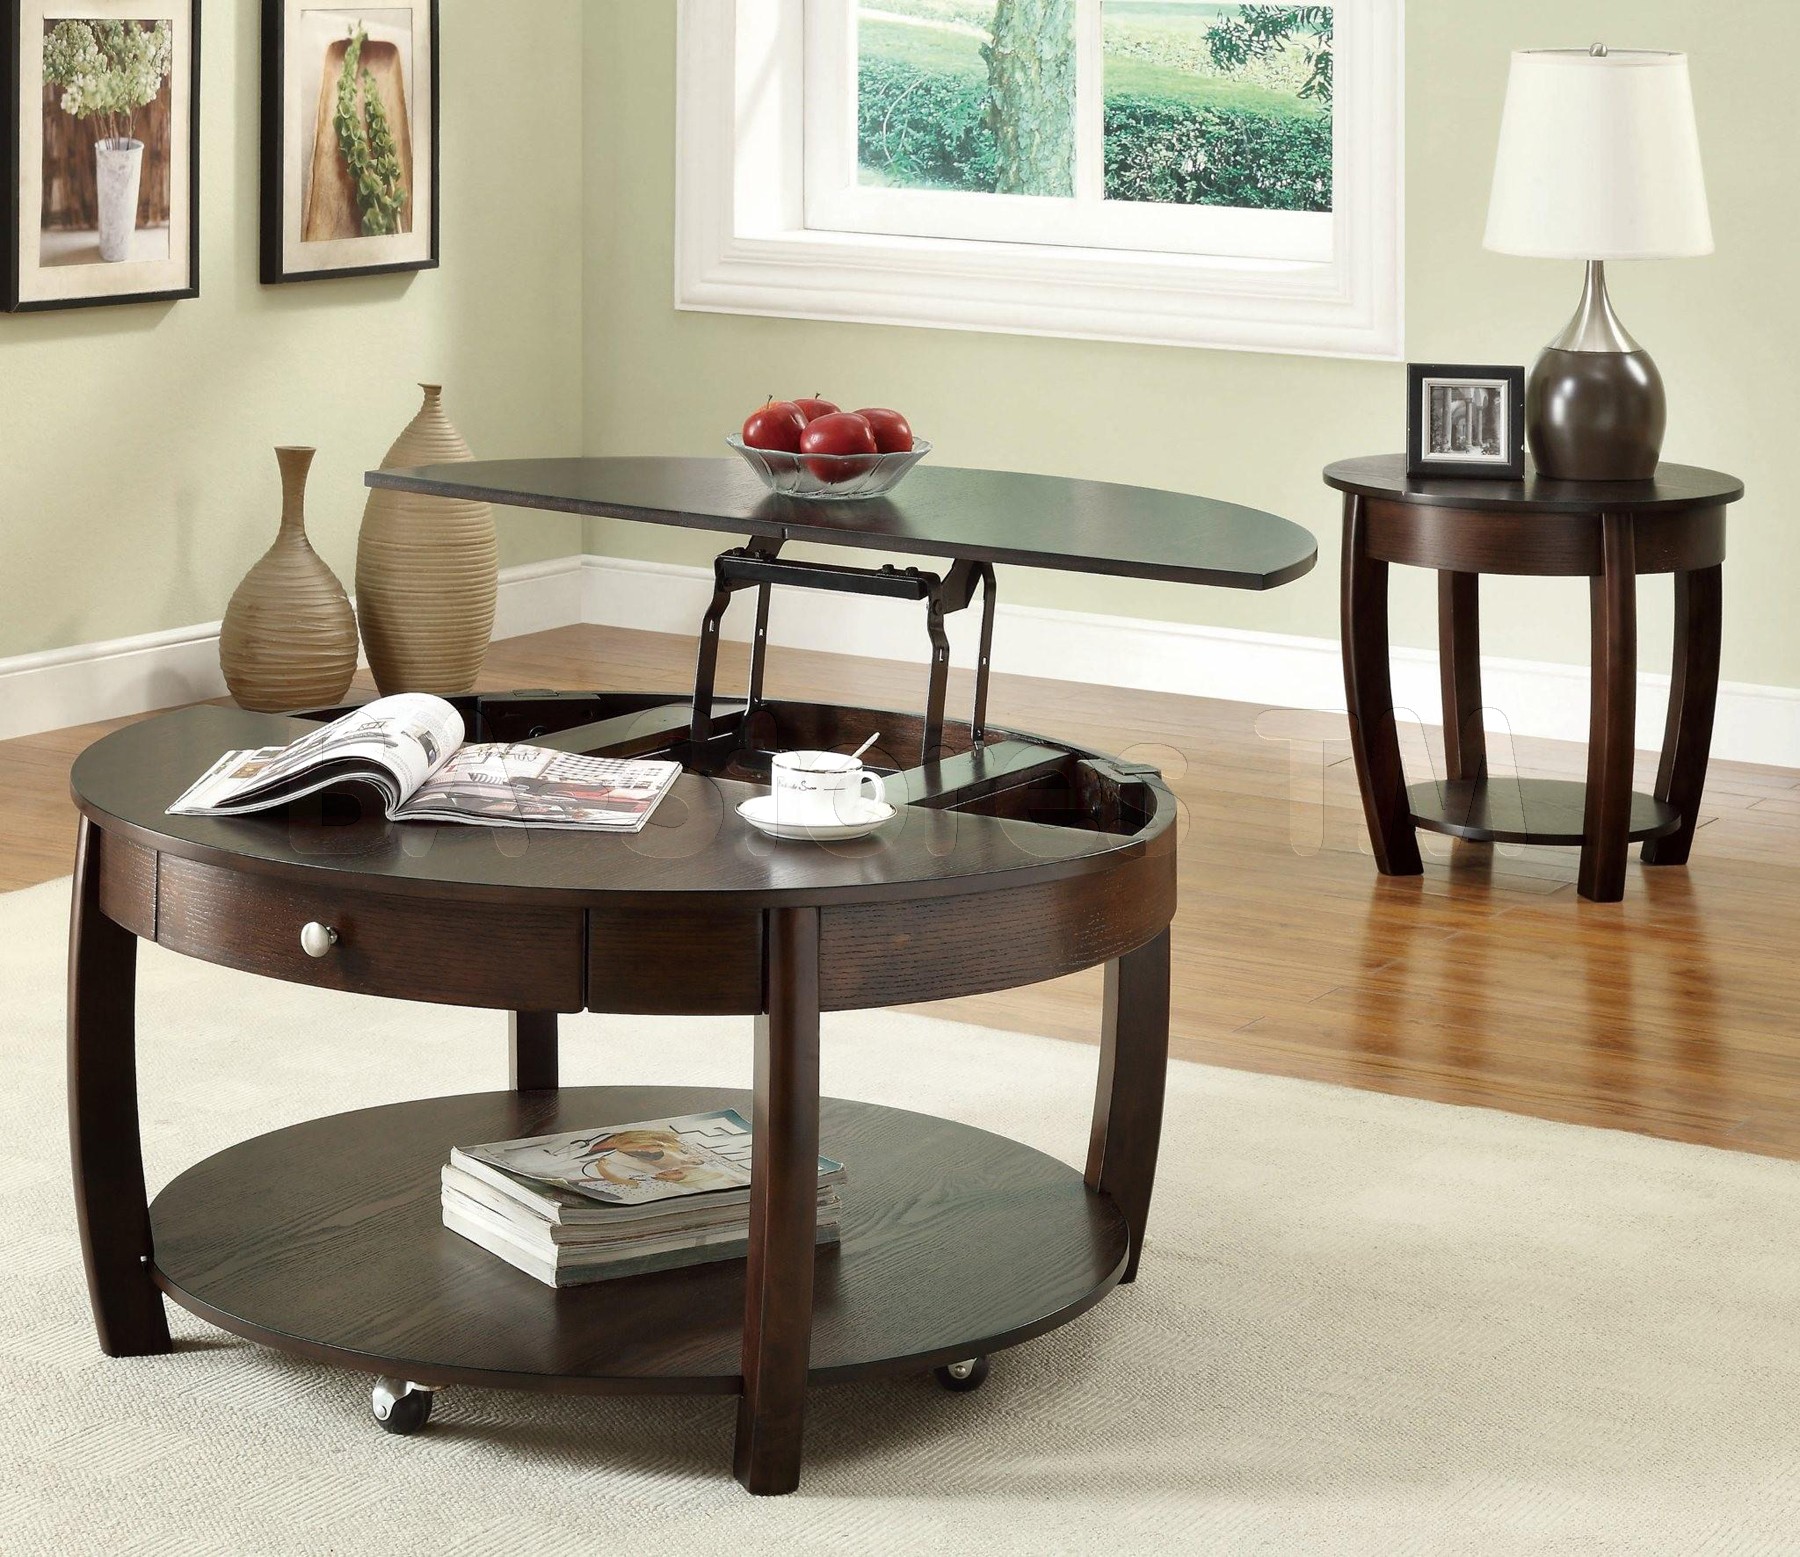 Lift top coffee tables design images photos pictures 3